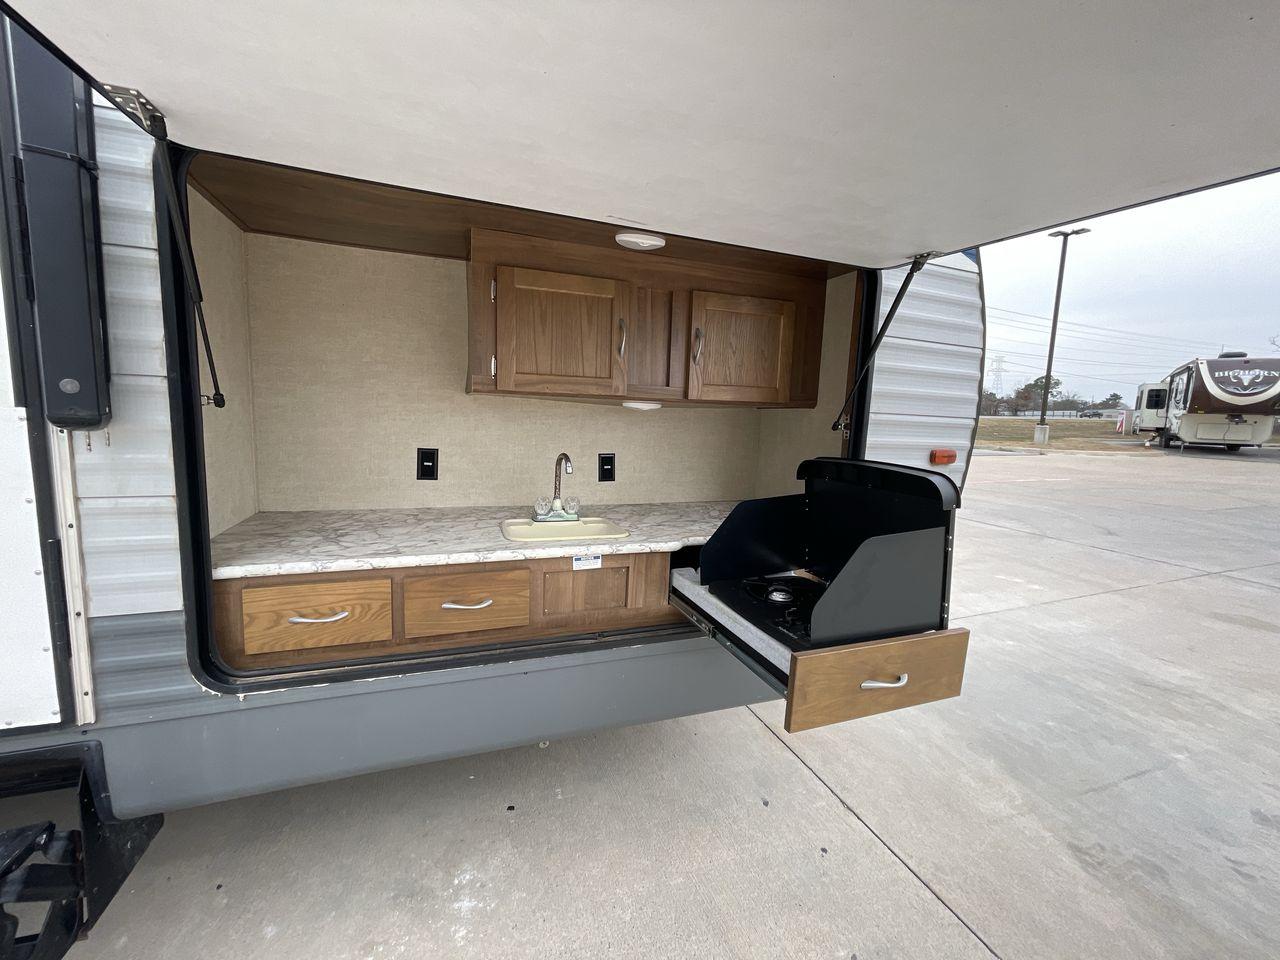 2018 GRAY GULF STREAM CONQUEST 30FRK - (1NL1G362XJ1) , Length: 35.67 ft. | Dry Weight: 7,898 lbs. | Slides: 2 transmission, located at 4319 N Main Street, Cleburne, TX, 76033, (817) 221-0660, 32.435829, -97.384178 - With the 2018 Gulf Stream Conquest 30FRK travel trailer, you'll have the ultimate comfort and convenience. Weighing in at 7,898 pounds dry, this well-designed trailer is 35.67 feet long, giving you plenty of room for your travels. The Conquest 30FRK is designed with two slides, one in the living are - Photo #10